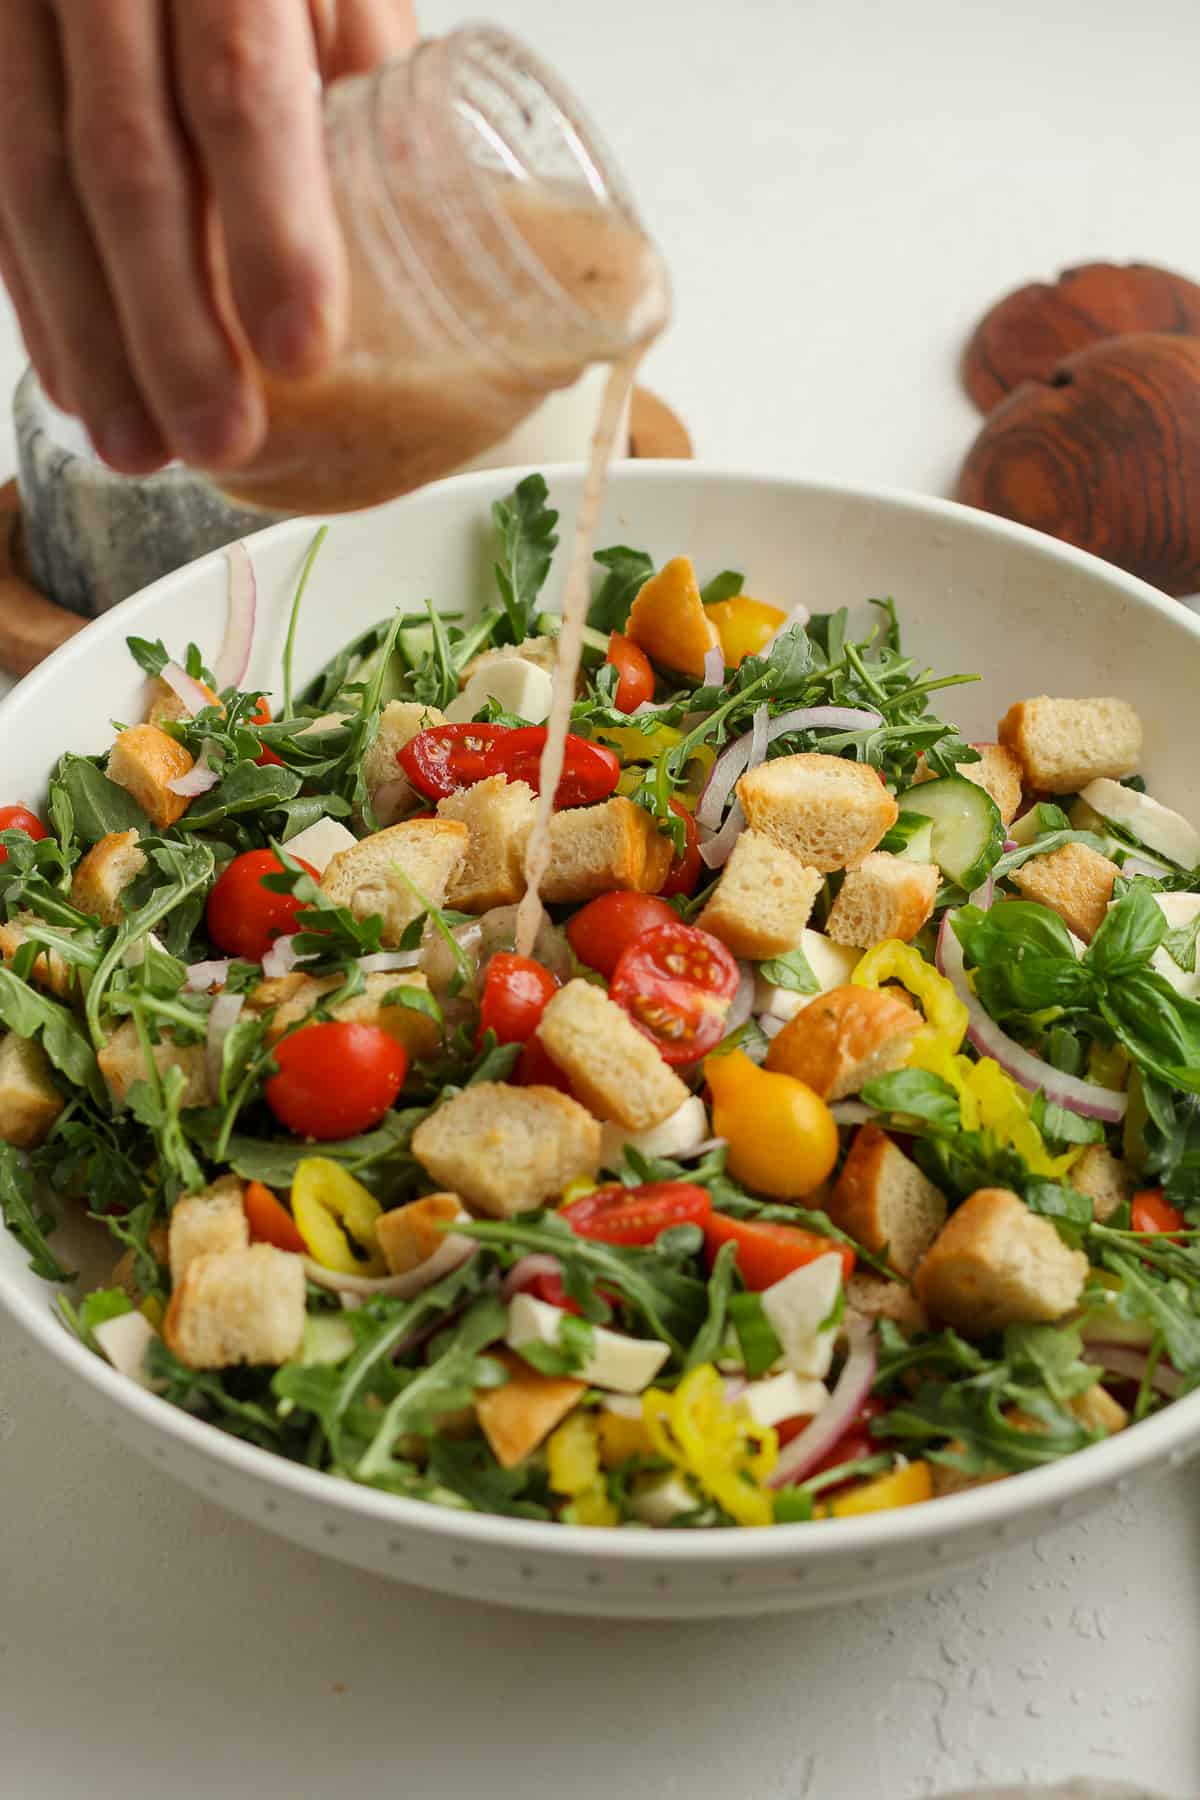 A hand drizzling dressing on a panzanella salad.